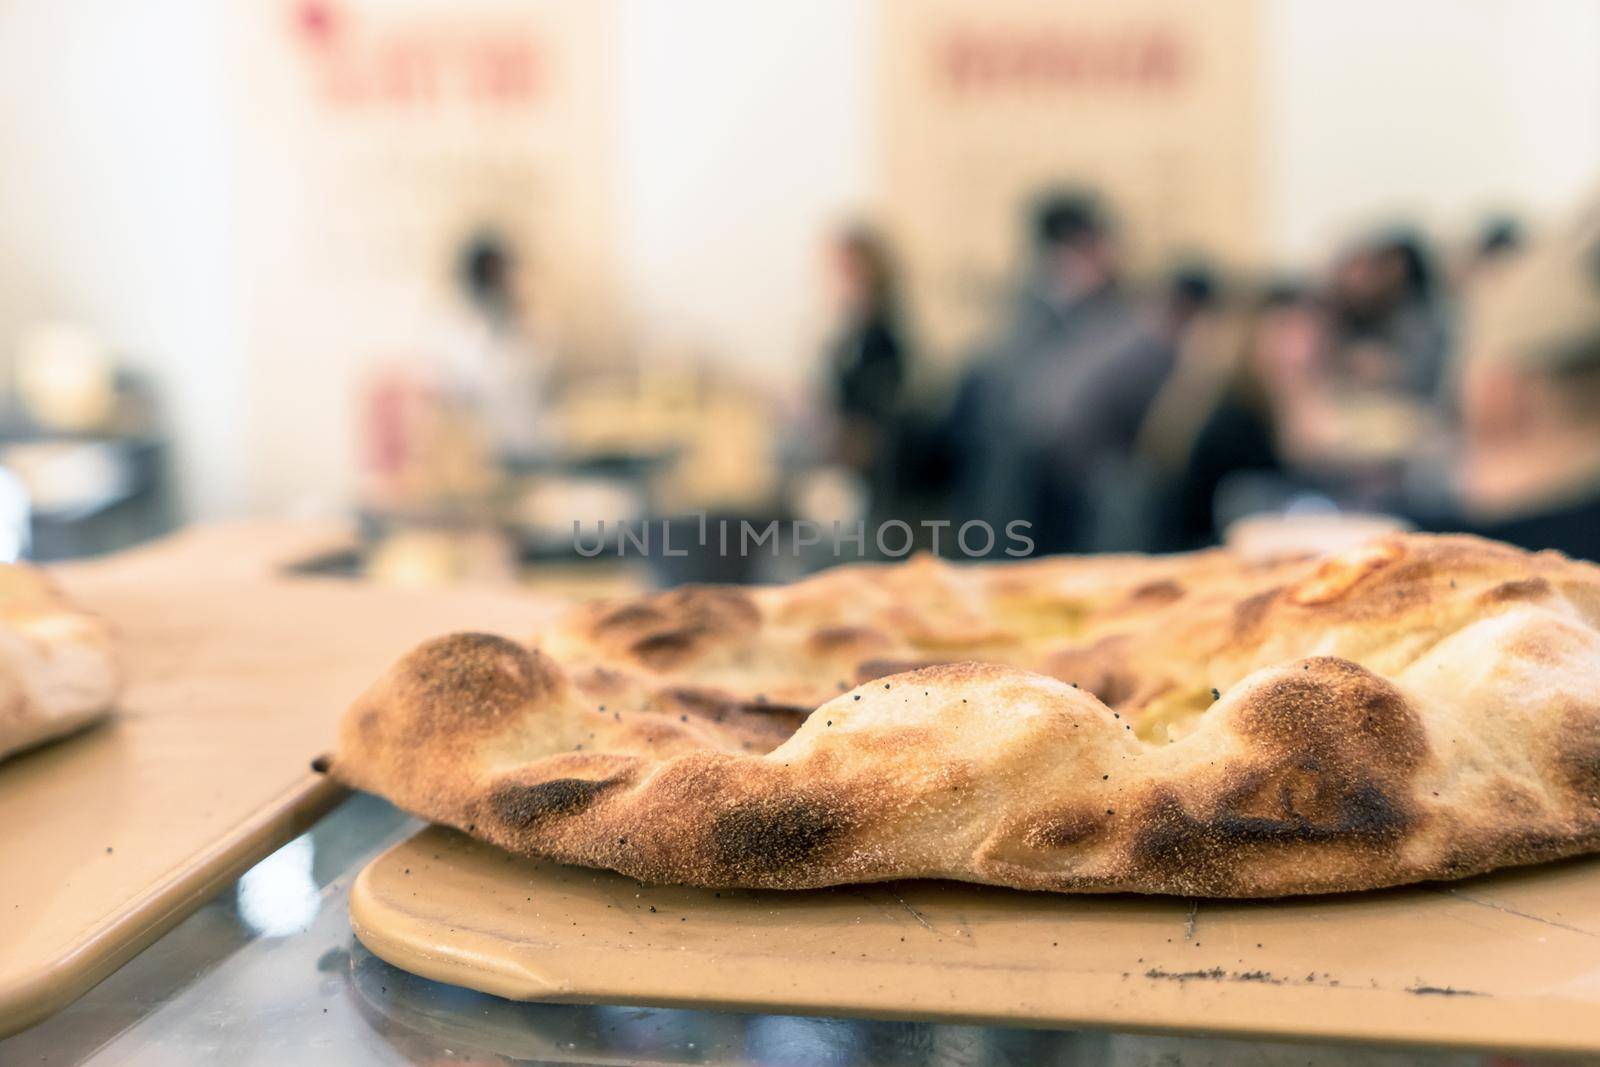 Traditional focaccia by germanopoli